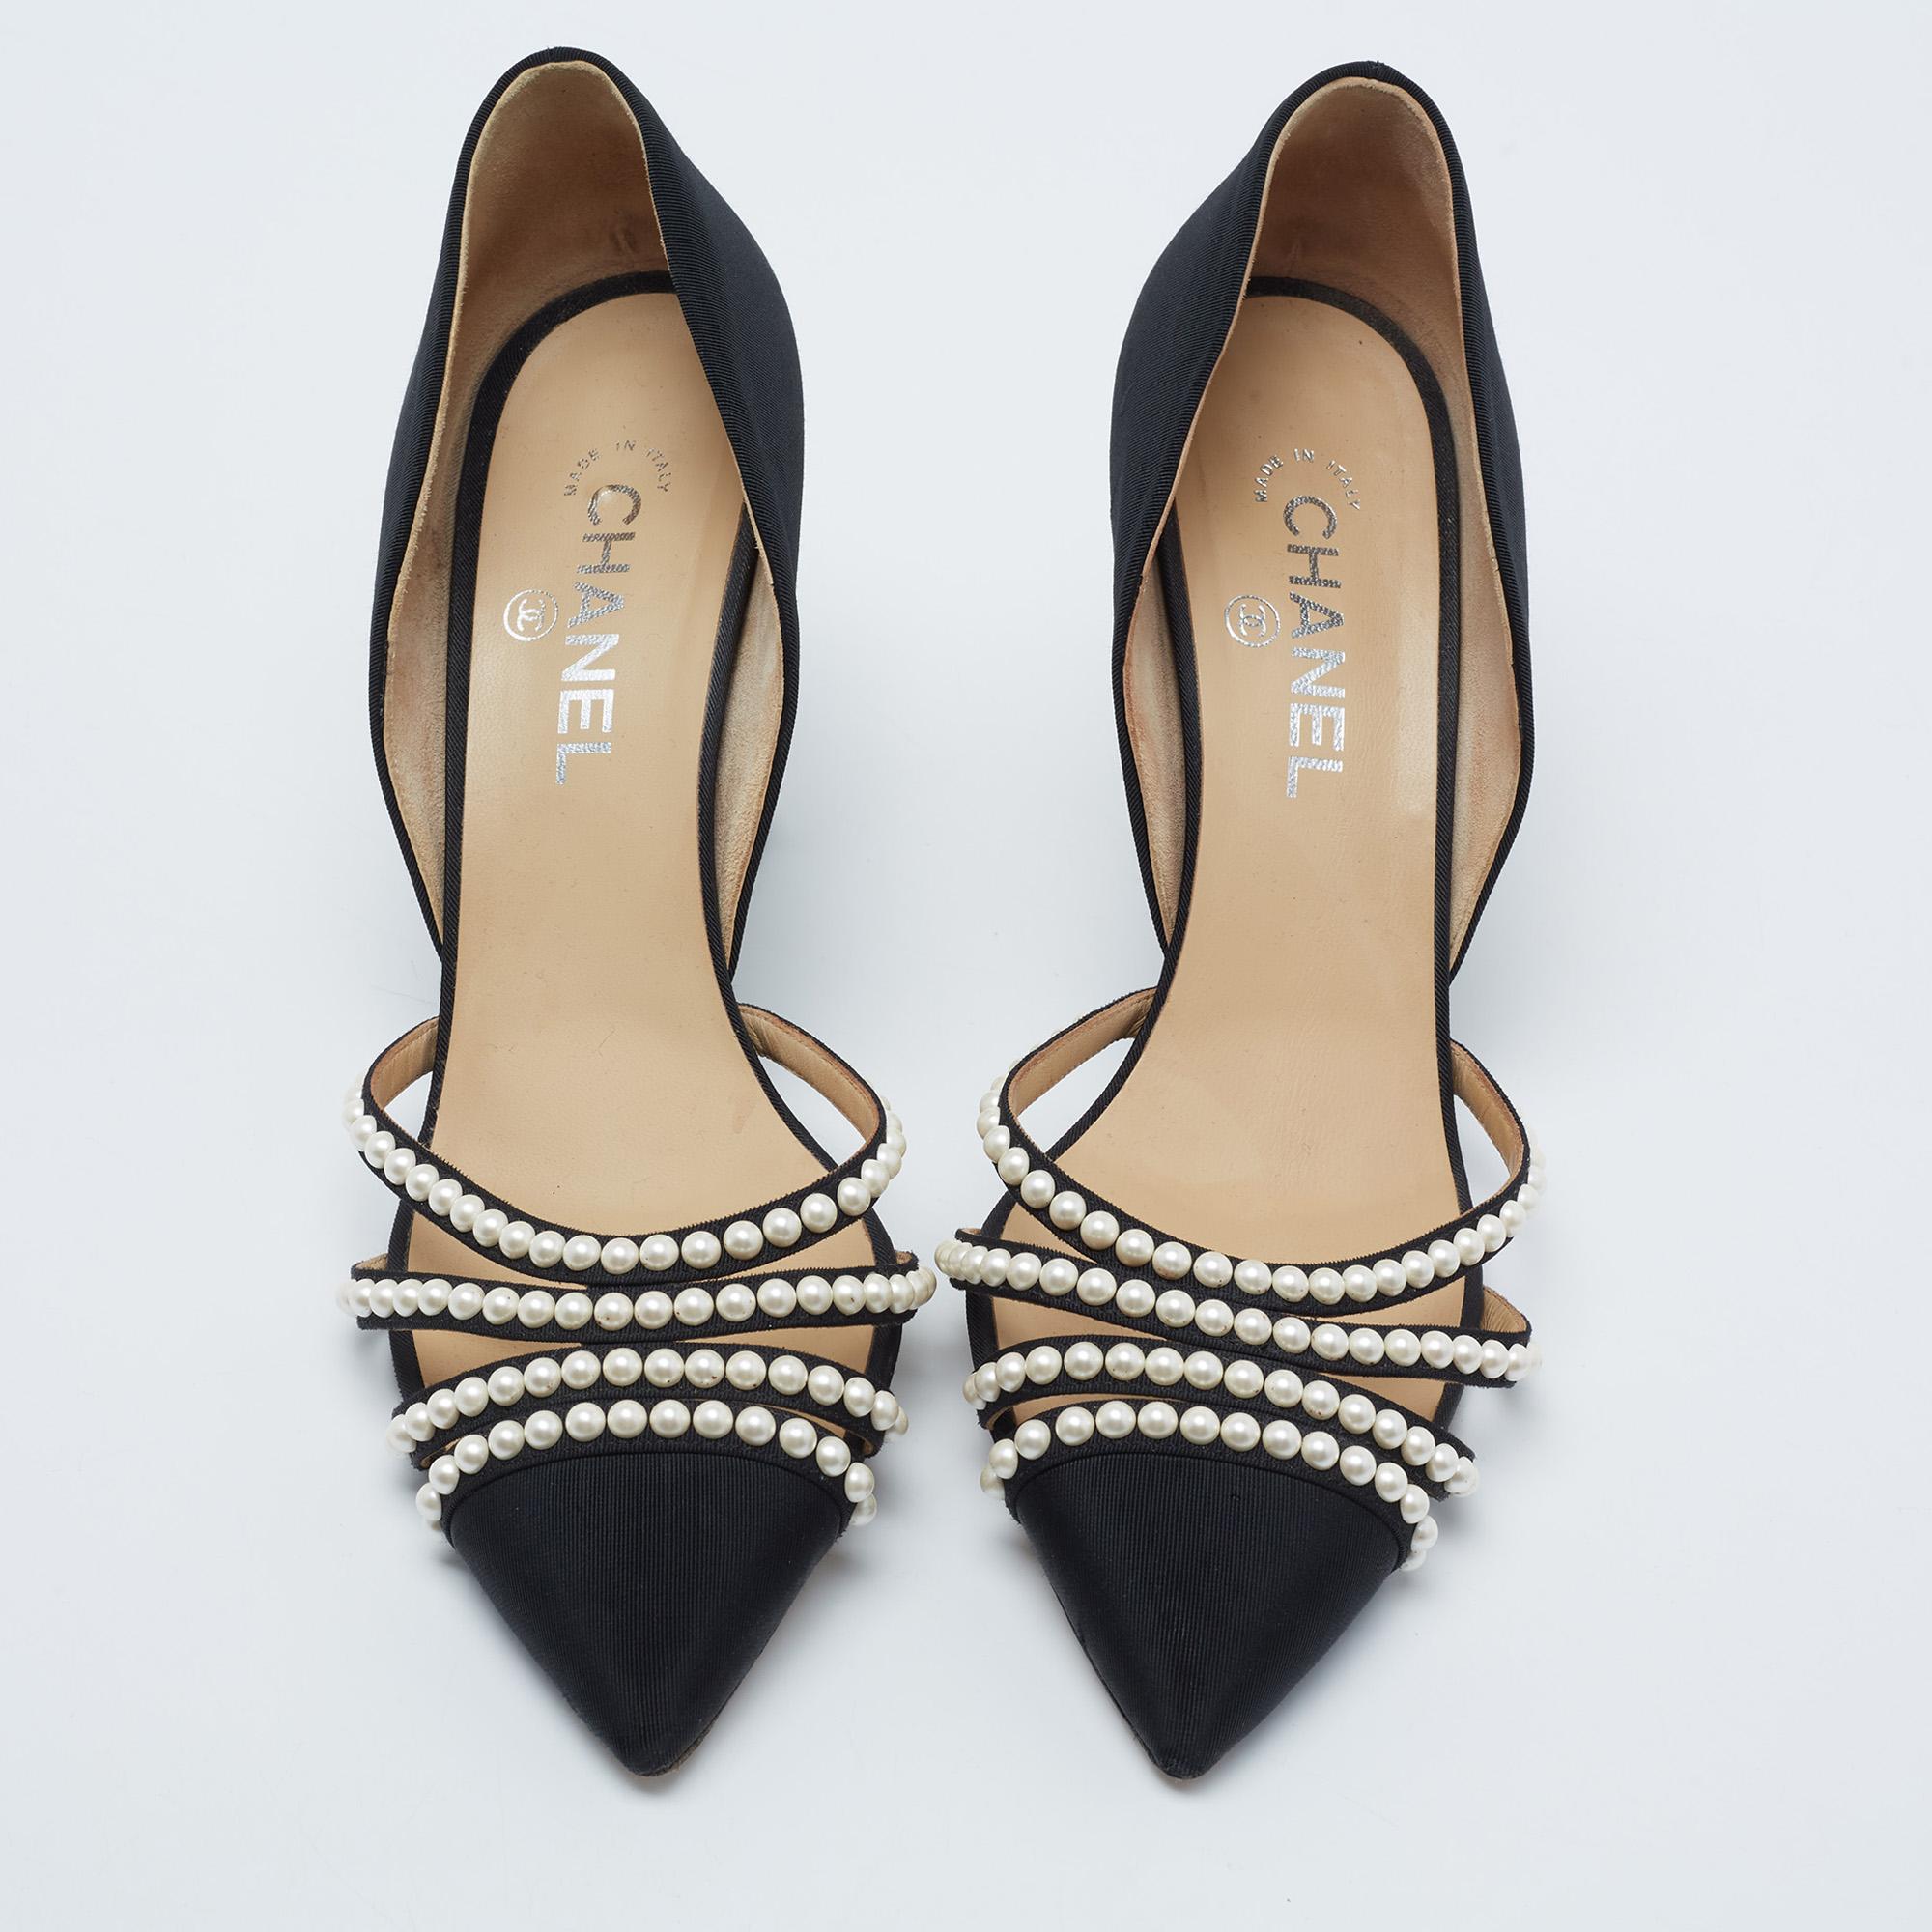 These Chanel pumps exude a refined style and sophisticated vibe with their design. Crafted from fabric and leather, they are highlighted by faux pearls. These beauties are finished off with 9.5 cm heels and comfortable insoles.

Includes: Original